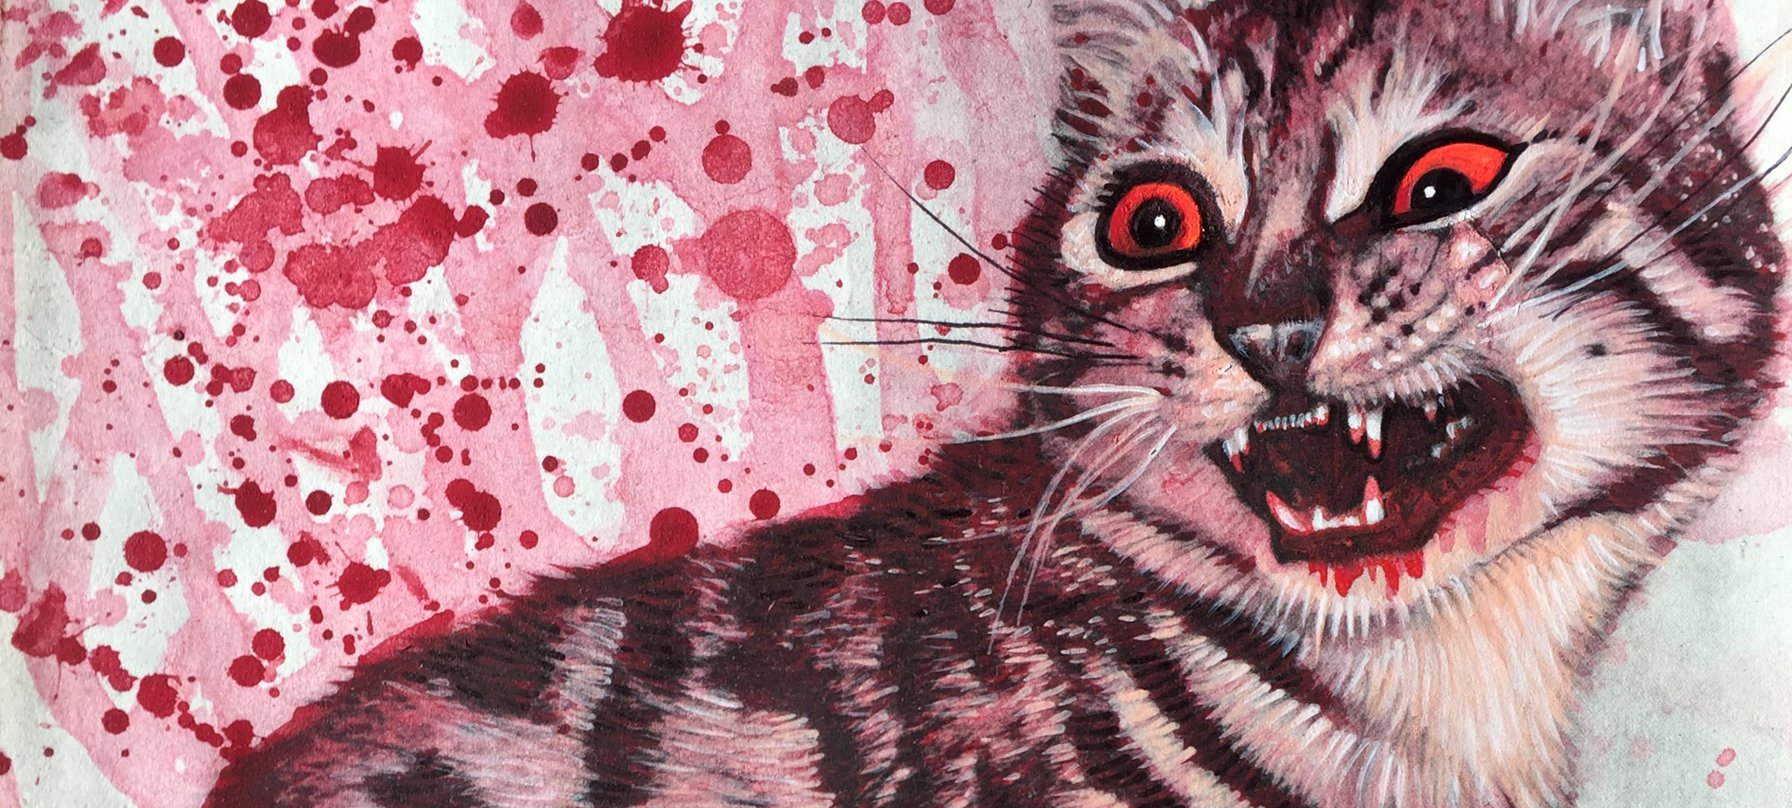 A photo of Sarah Eden's artwork. The artwork depicts a snarling tabby cat with red eyes and red liquid dripping from its lips. The background of the work features splatters and drips of red. Credit Sarah Eden.